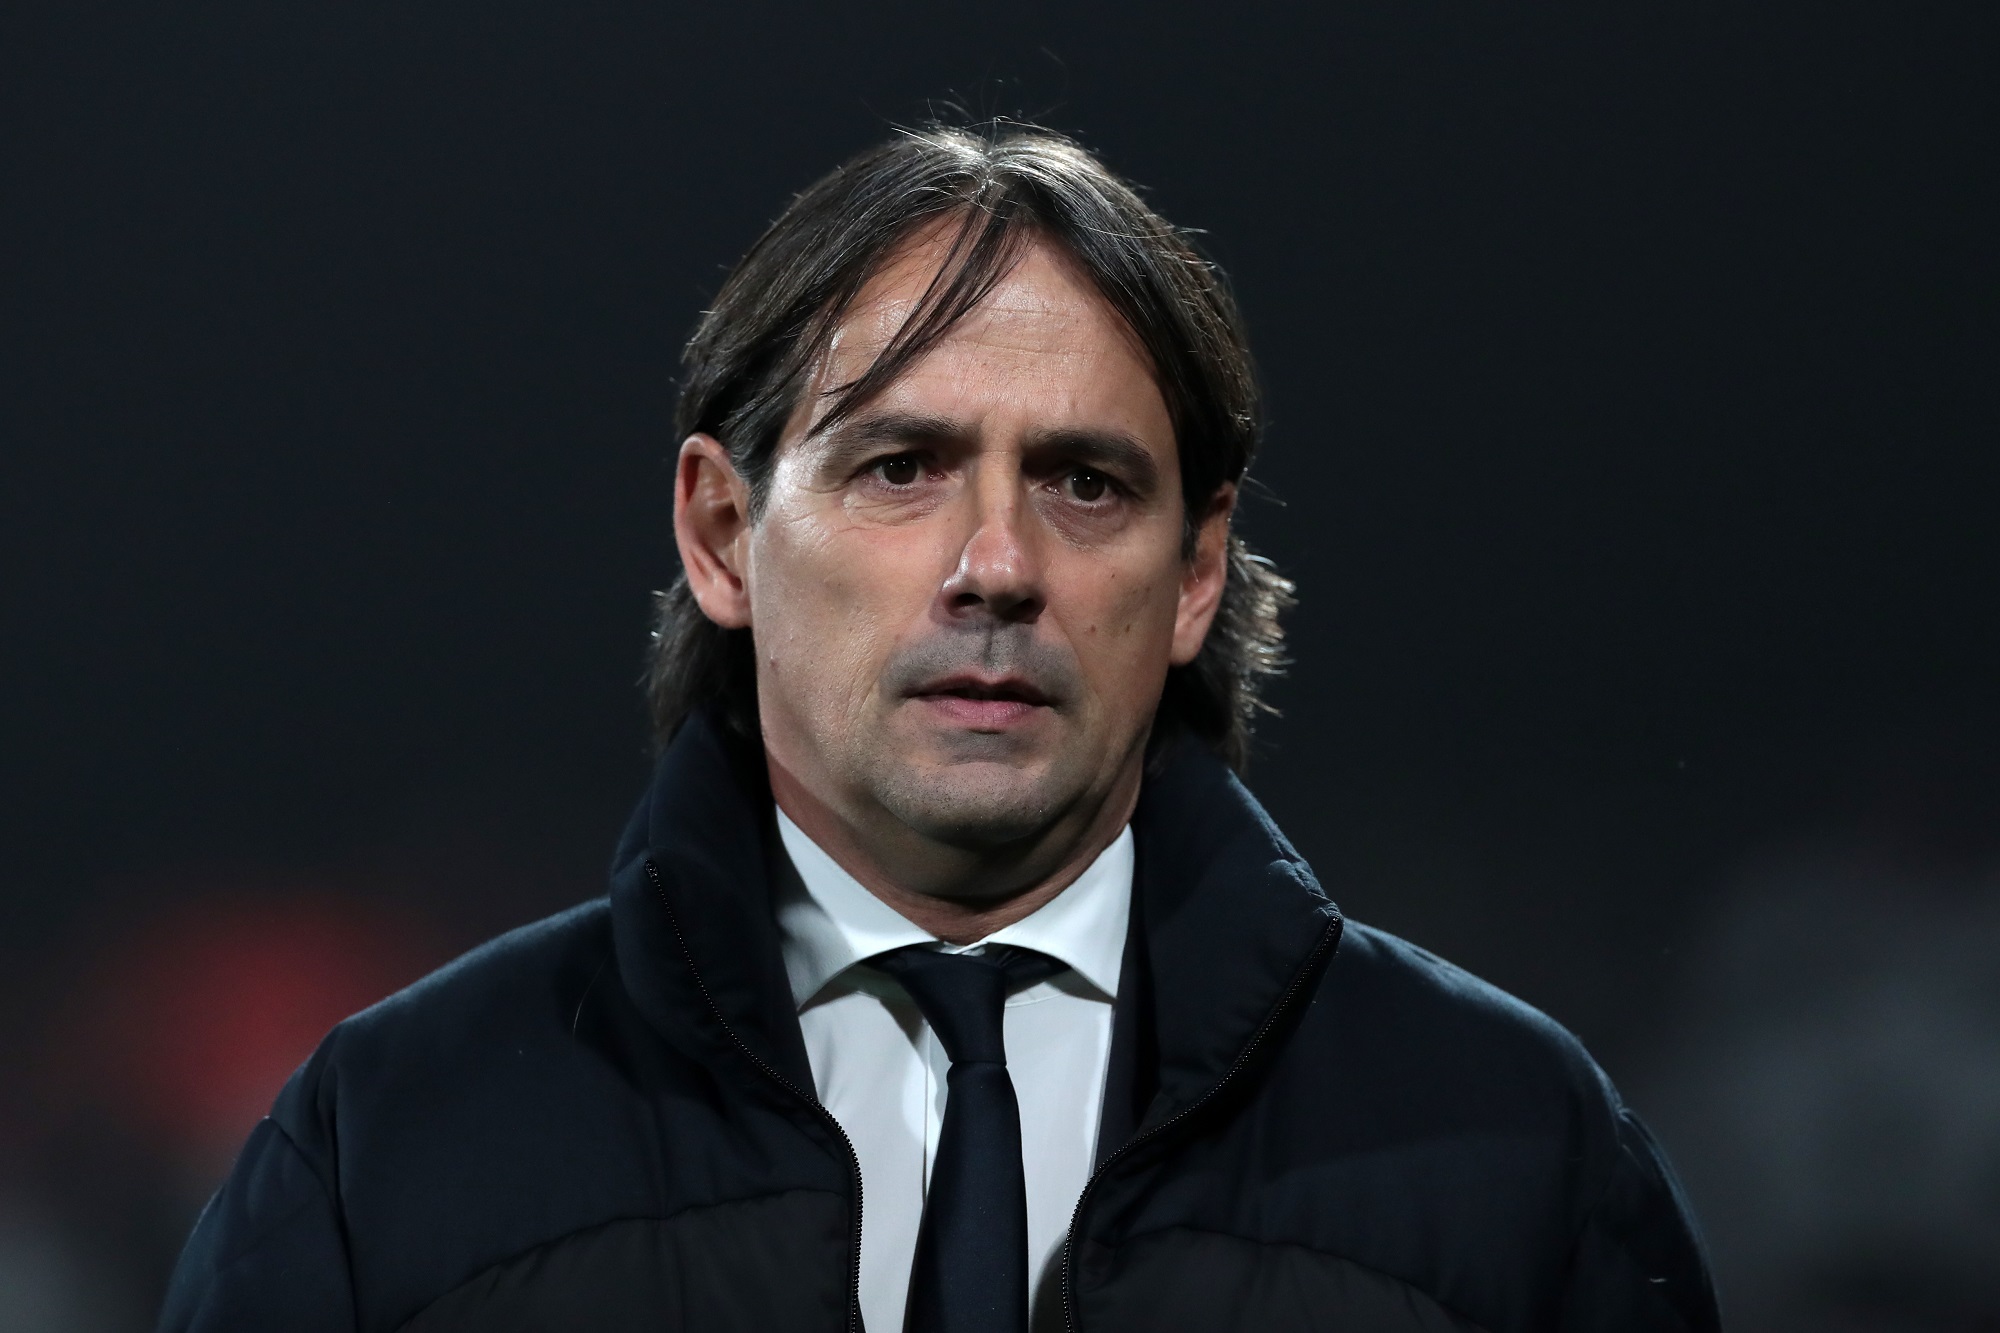 Despite the UEFA Champions League final encounter against Manchester City looming on the horizon, Inzaghi is confident of seeing his team focused.